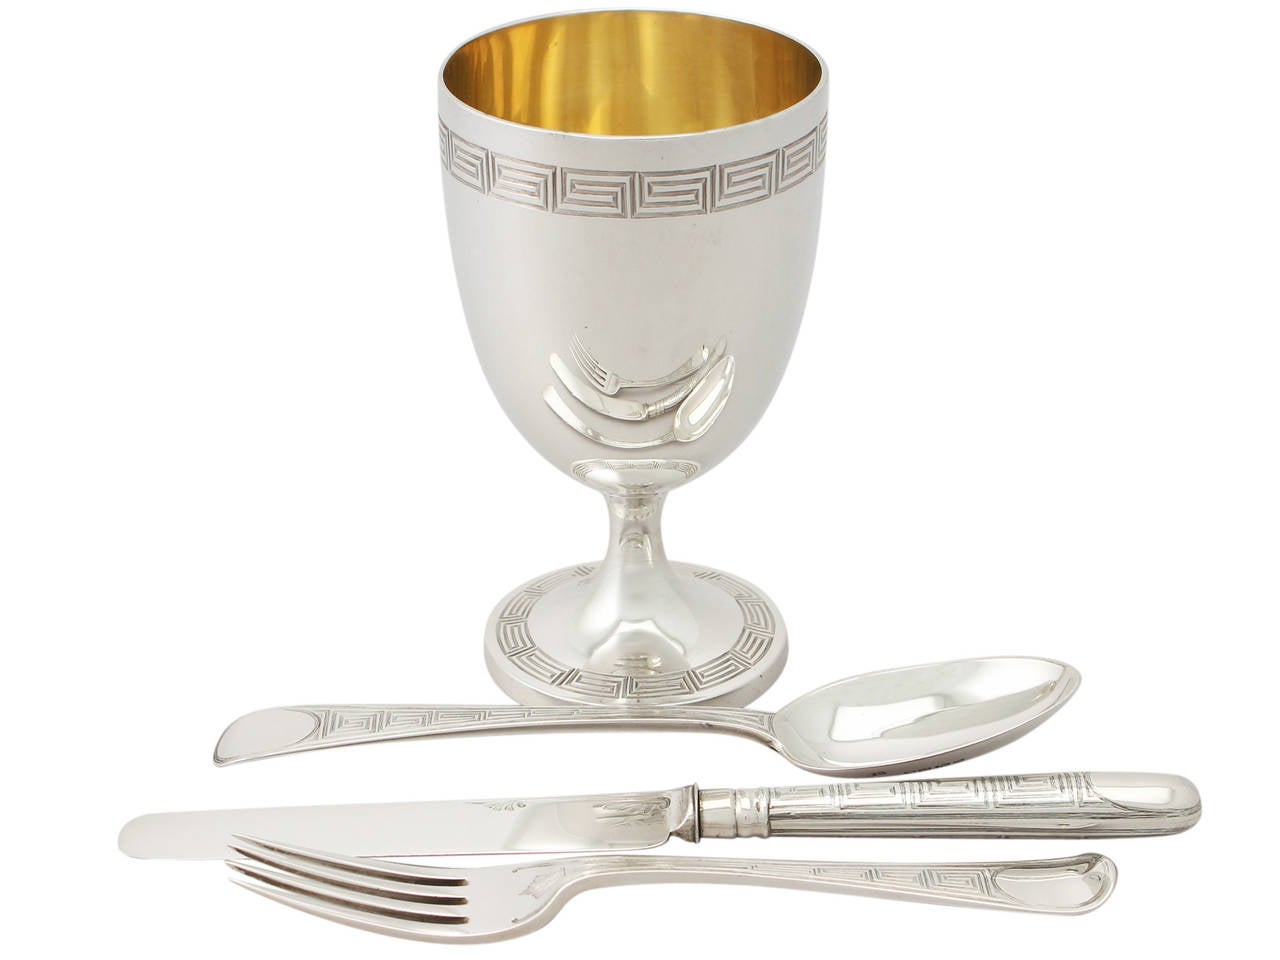 An exceptional, fine and impressive antique Victorian English sterling silver campaign/christening set - boxed; an addition to our range of collectable silverware.

This fine antique Victorian sterling silver campaign*/christening set consists of